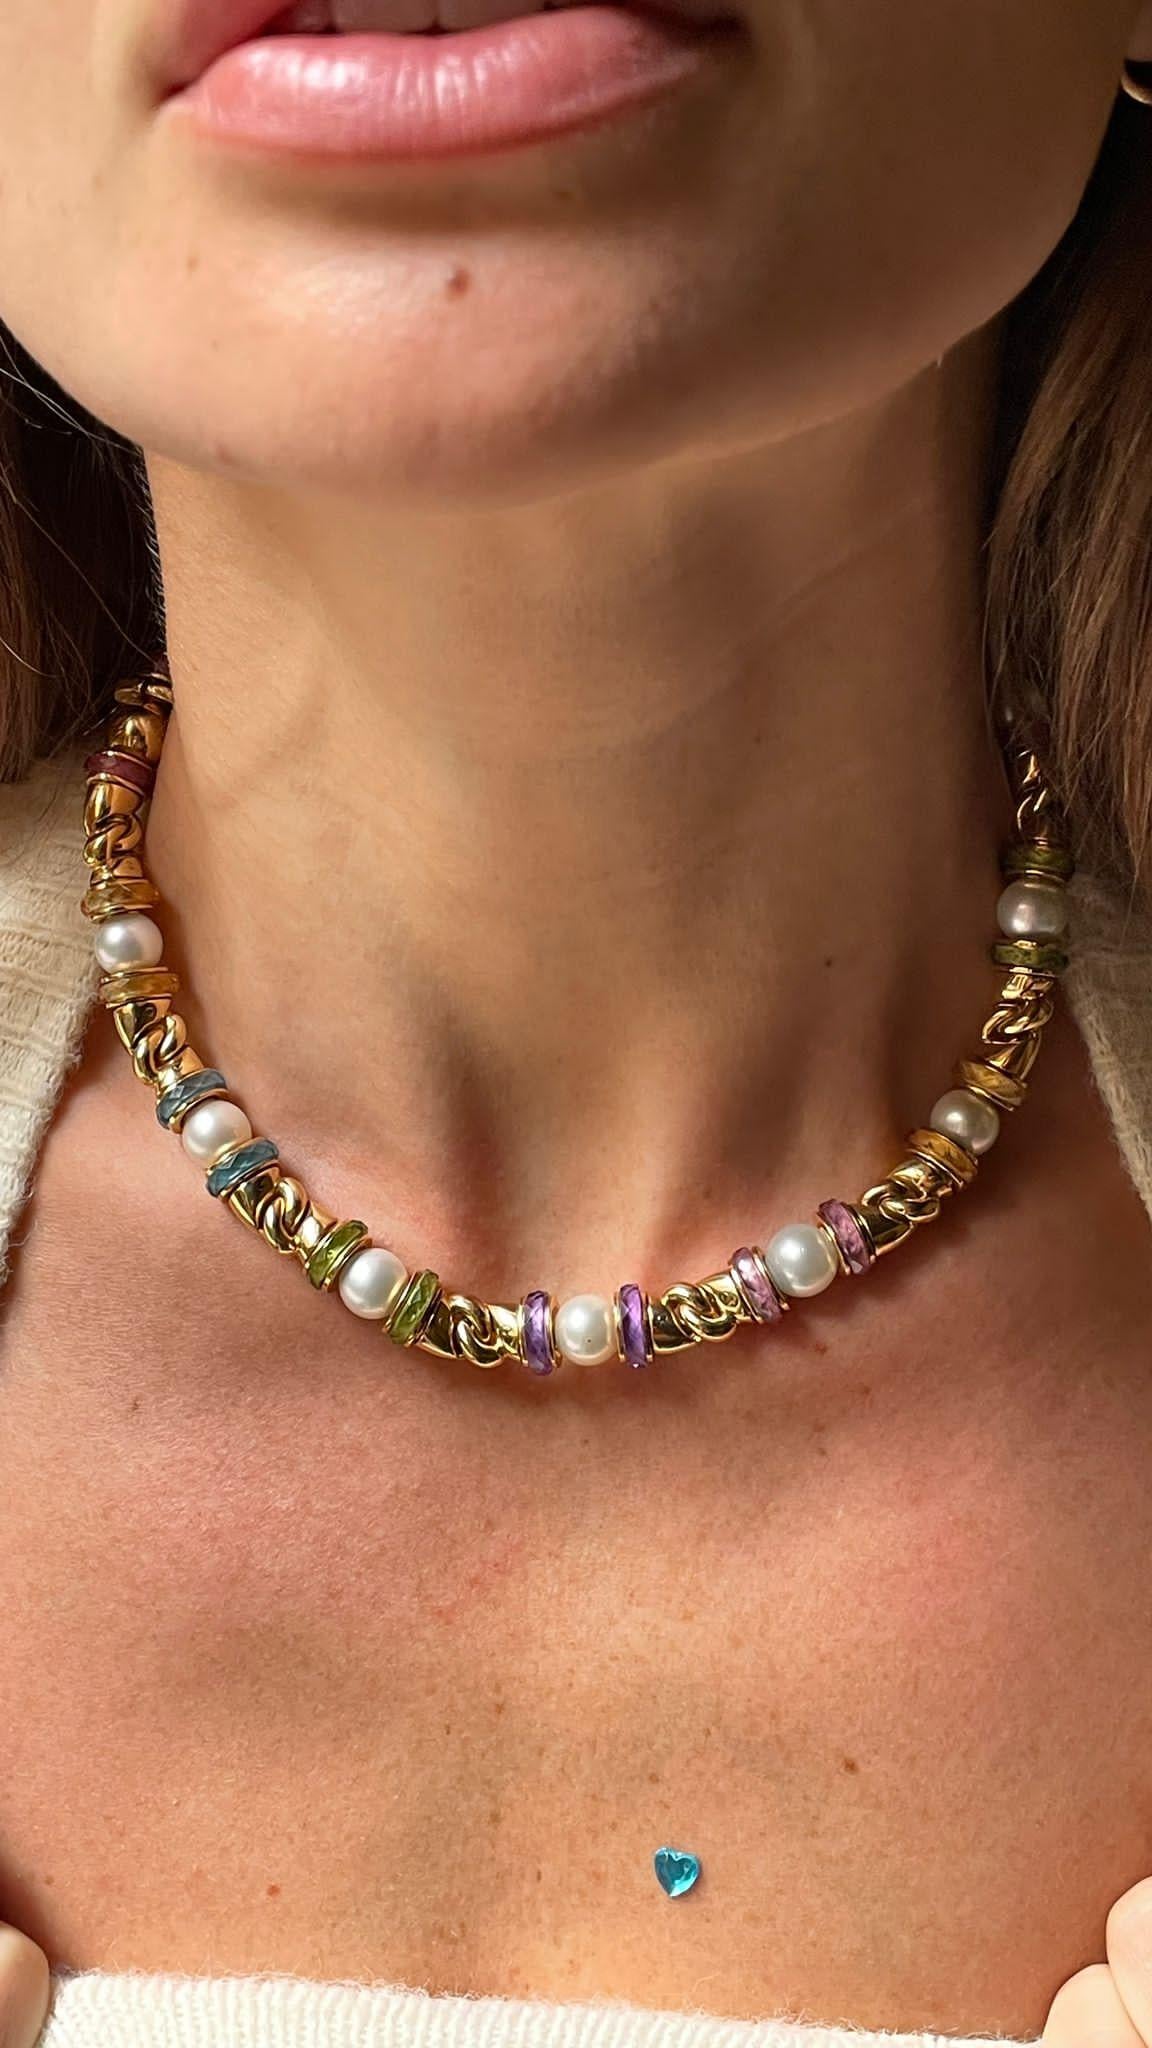 18 Karat Yellow Gold Bulgari Gancio Necklace. The necklace features 17 akoya cultured pearls measuring 7.6mm, beautifully accented by colored sapphires and tormalines rondells weighing 4/5 carats.
Comes in Original Bulgari soft pouch
Matching ring